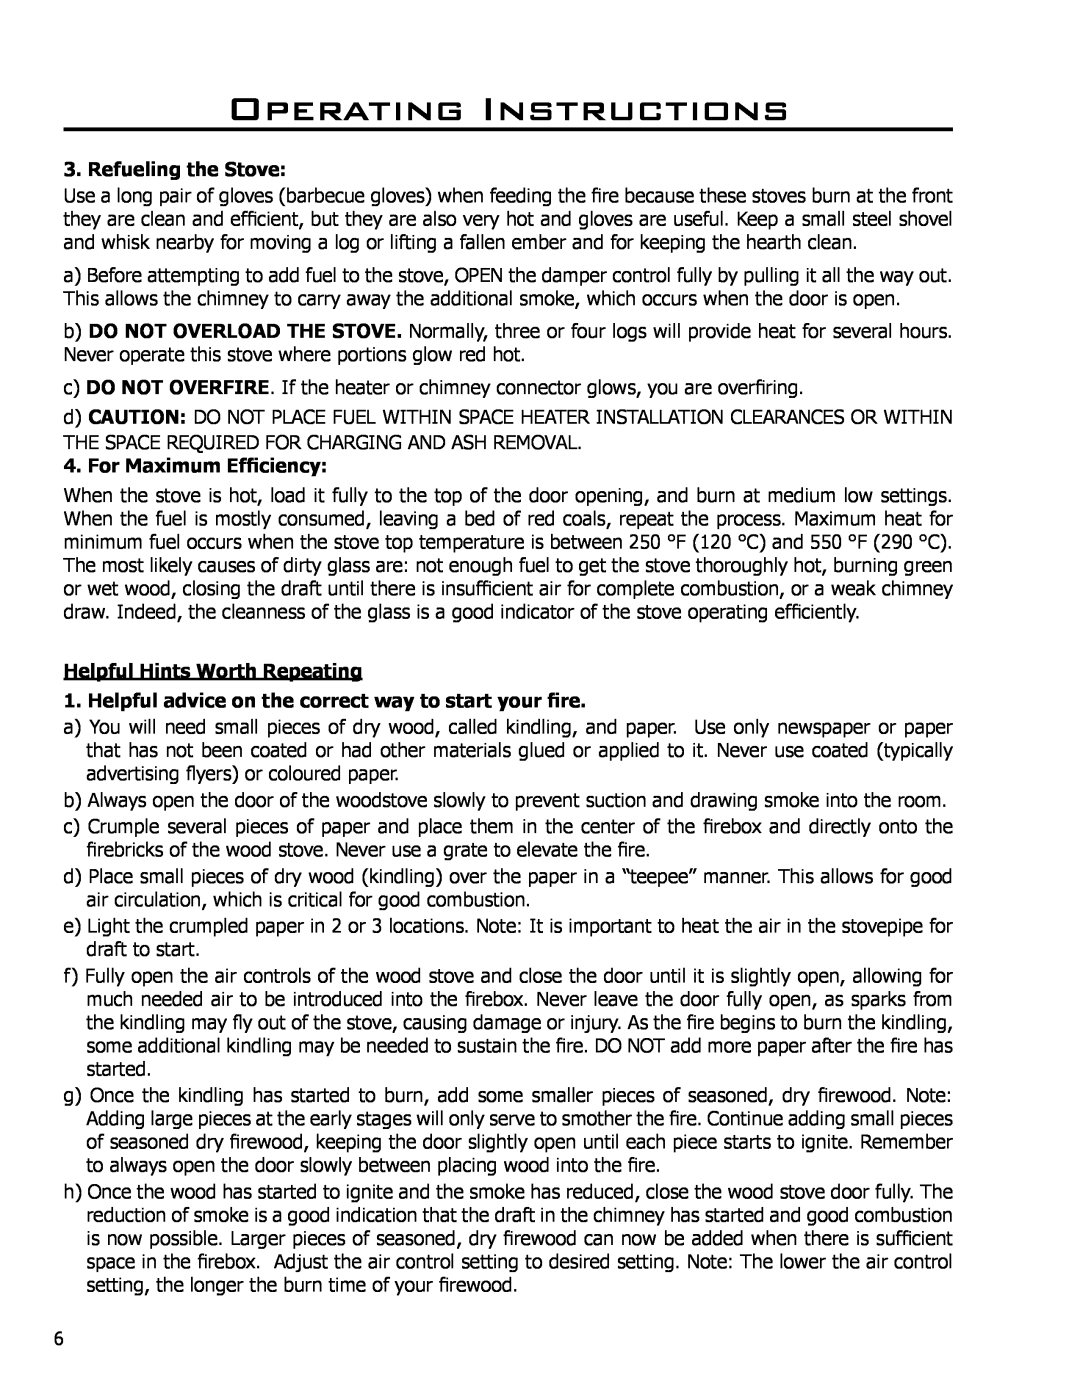 Enviro 2100 owner manual Operating Instructions, Refueling the Stove, For Maximum Efficiency, Helpful Hints Worth Repeating 